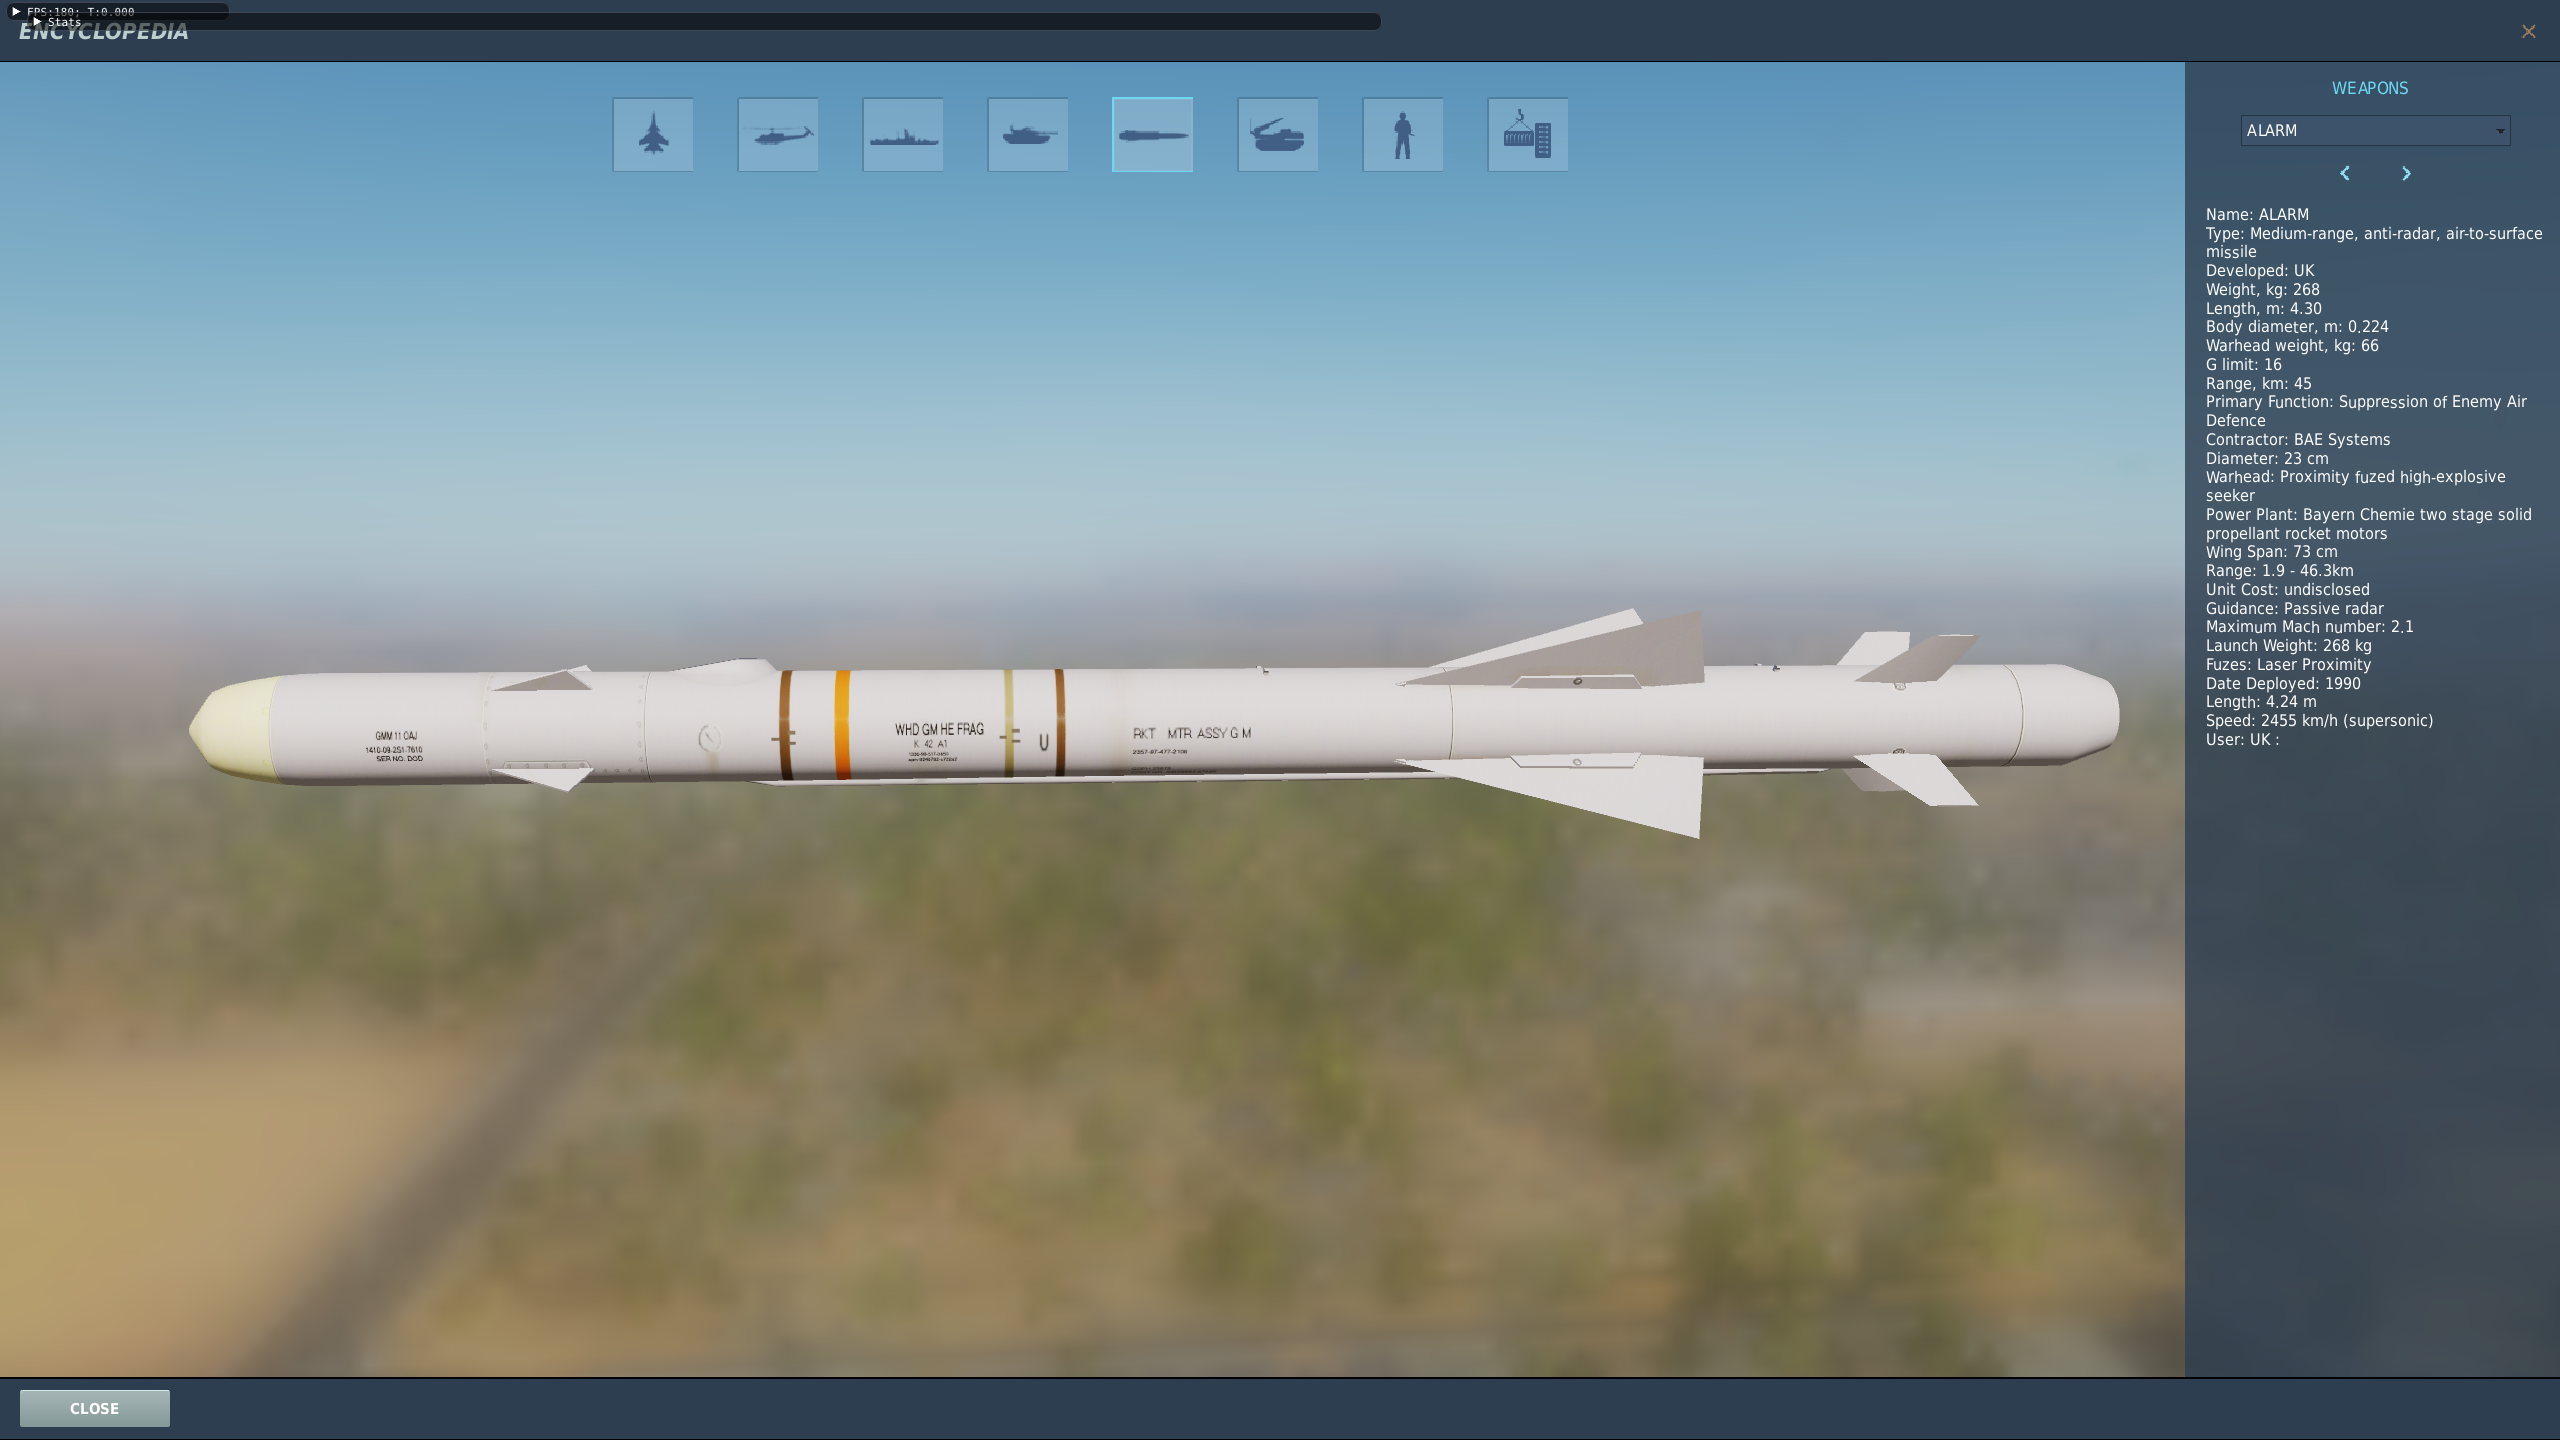 Operational ALARM Missile - DCS Core Wish List - ED Forums